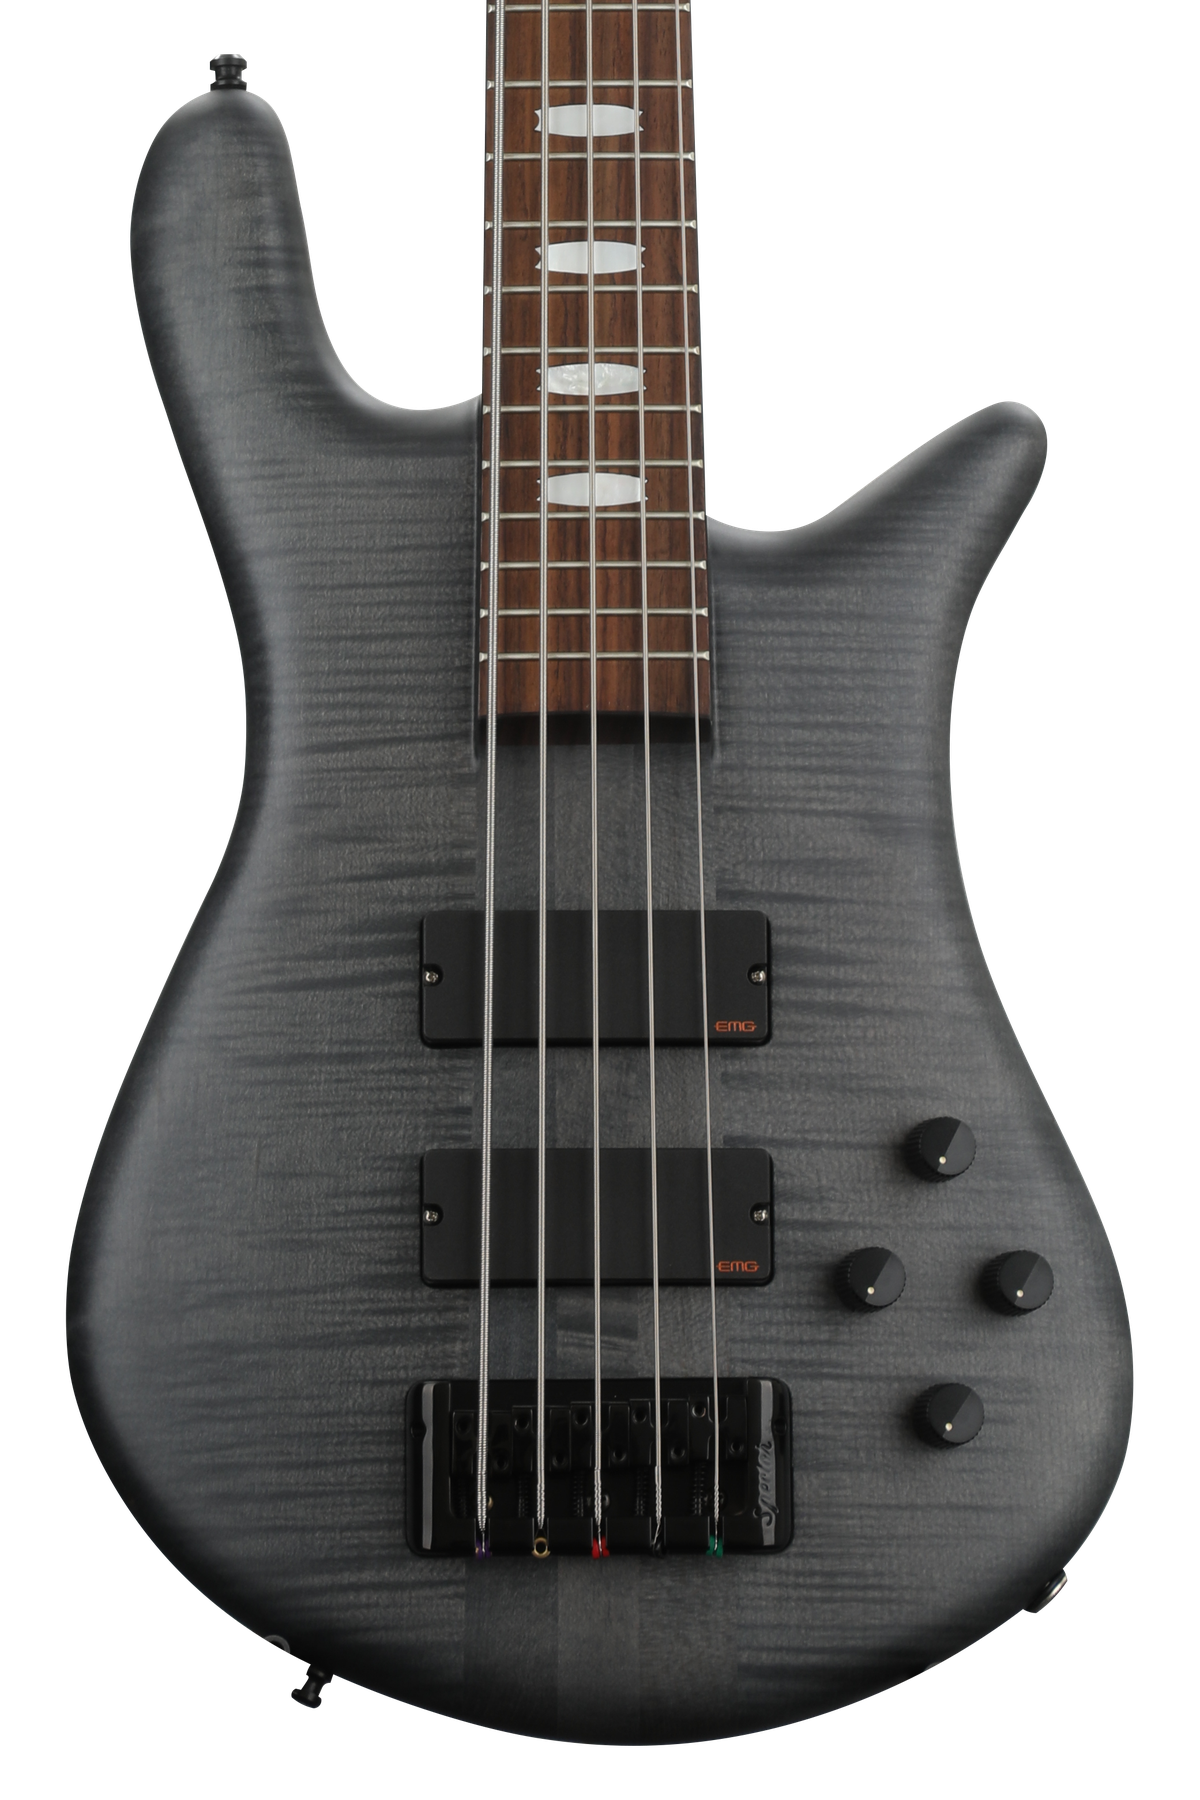 Spector Euro5 LX Bass Guitar - Trans Black Stain Matte | Sweetwater